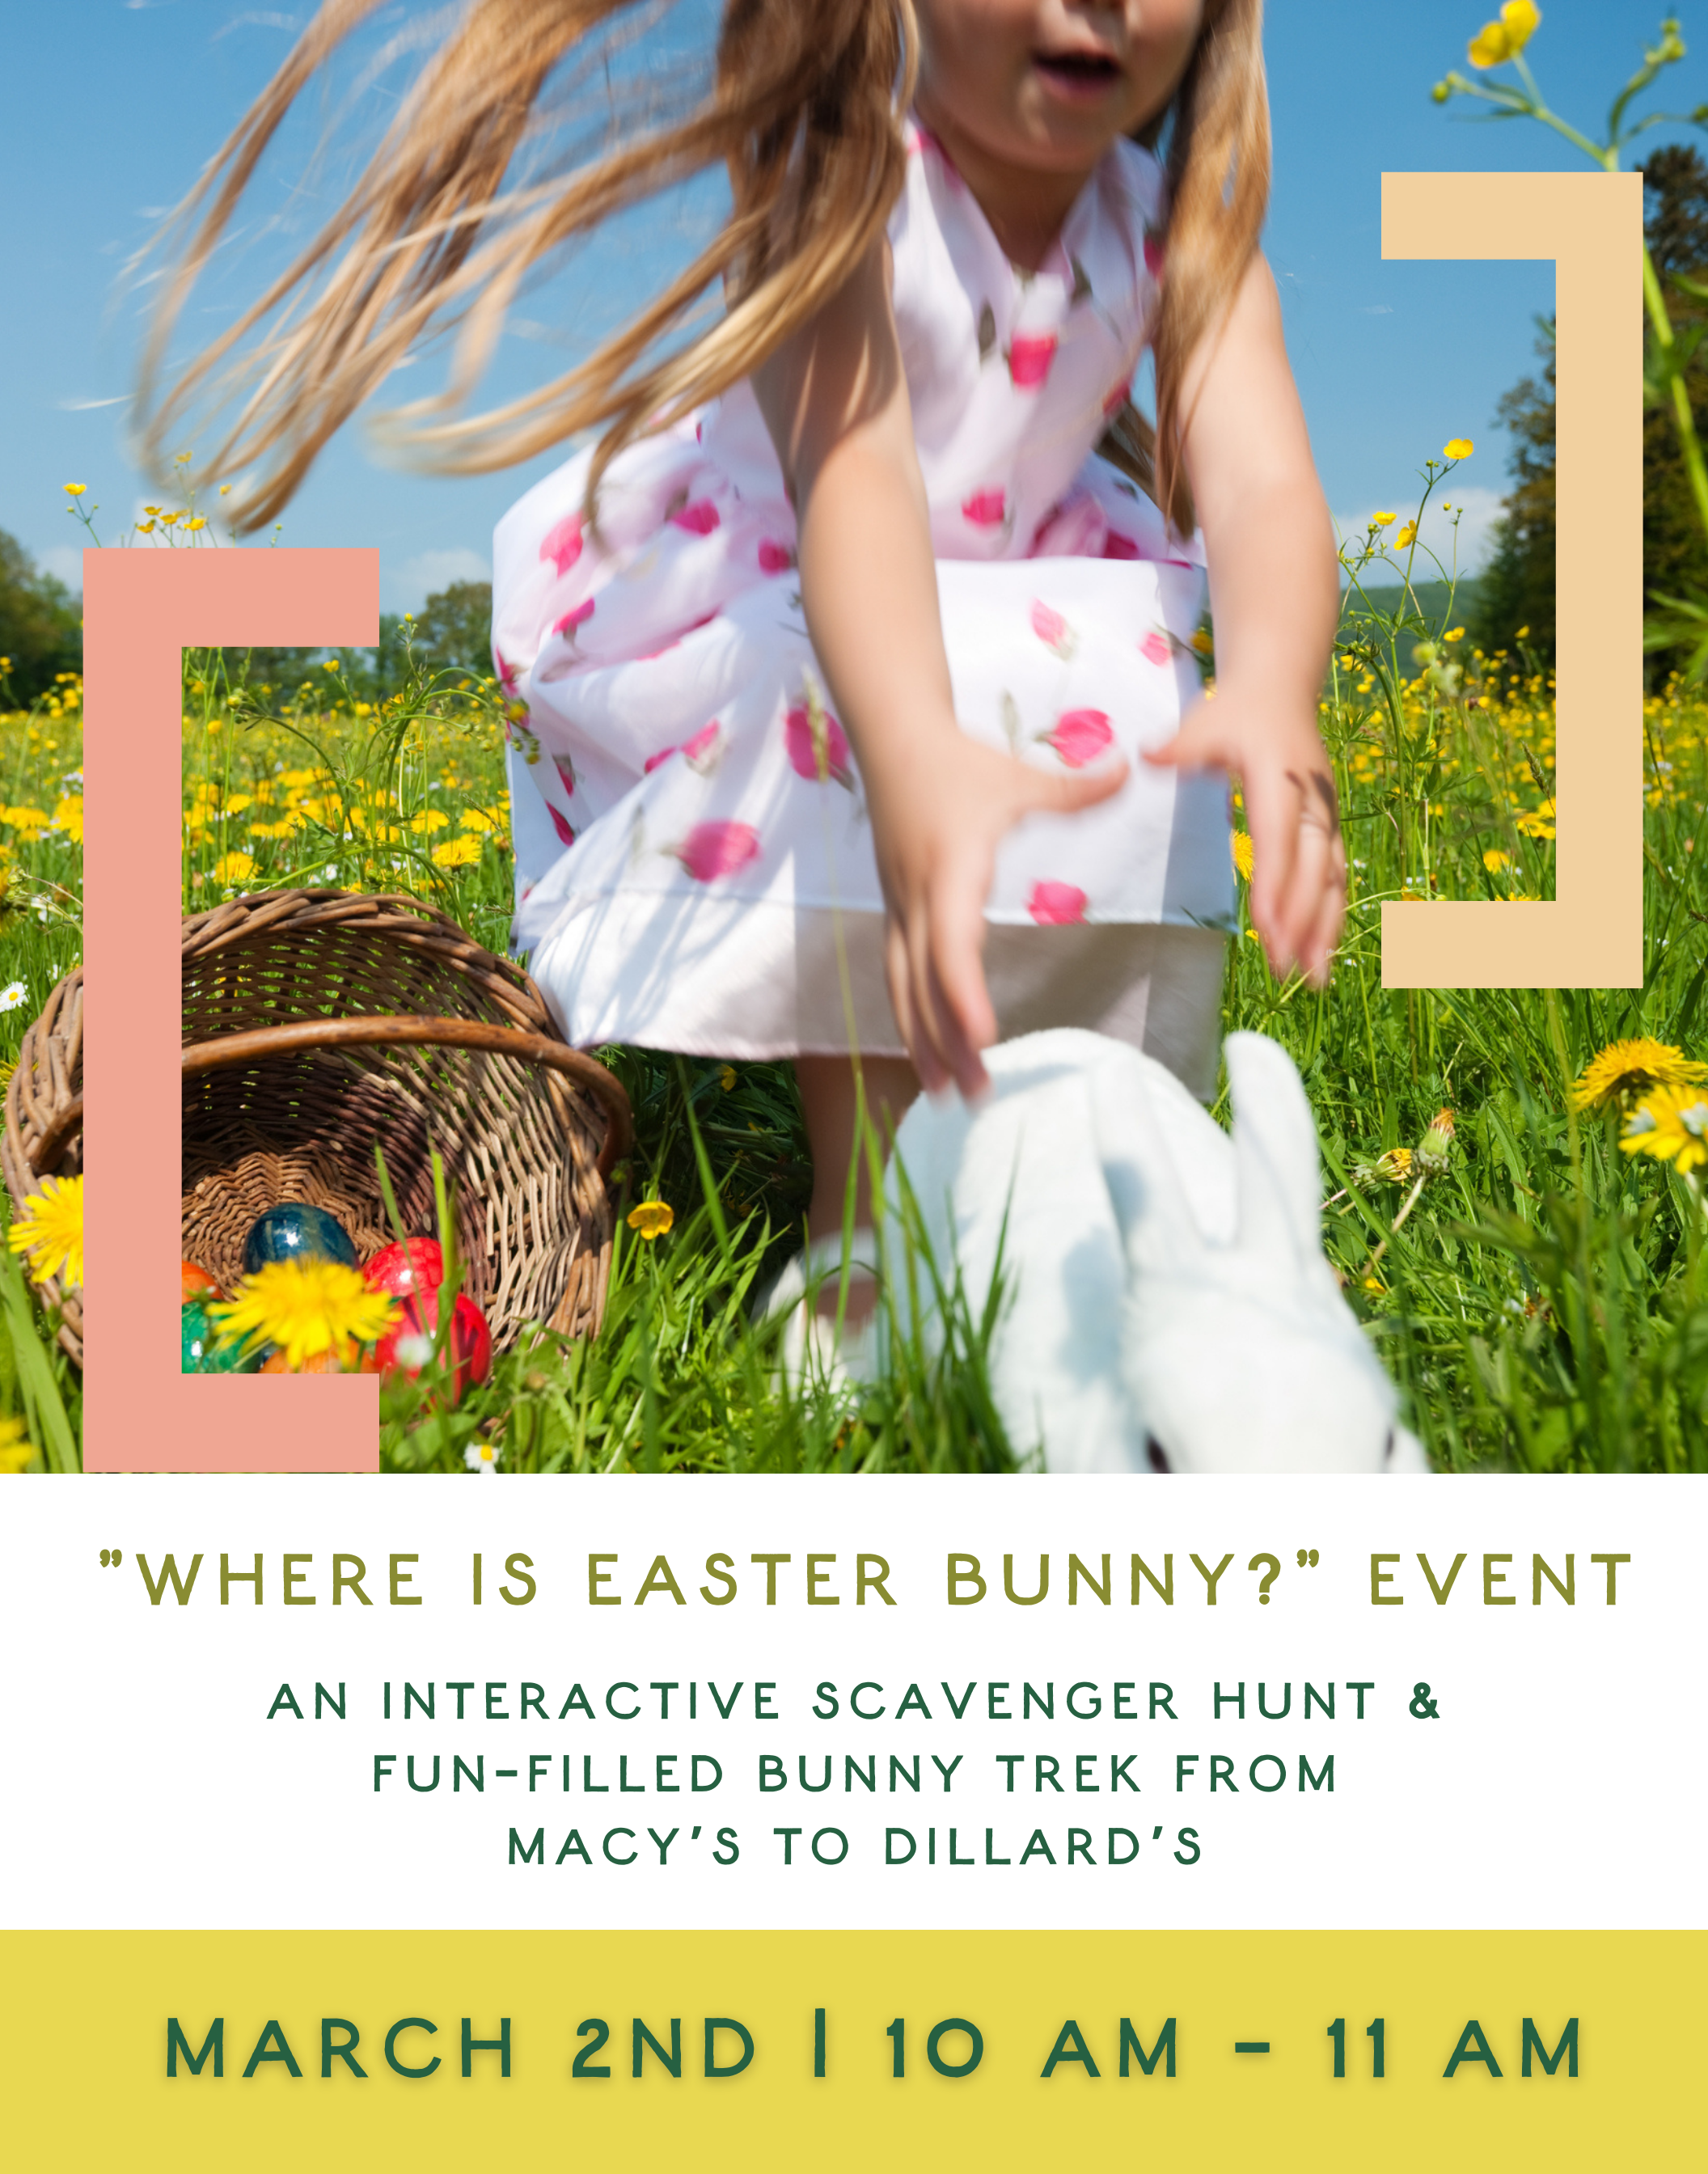 WHERE IS EASTER BUNNY EVENT? AN INTERACTIVE SCAVENGER HUNT